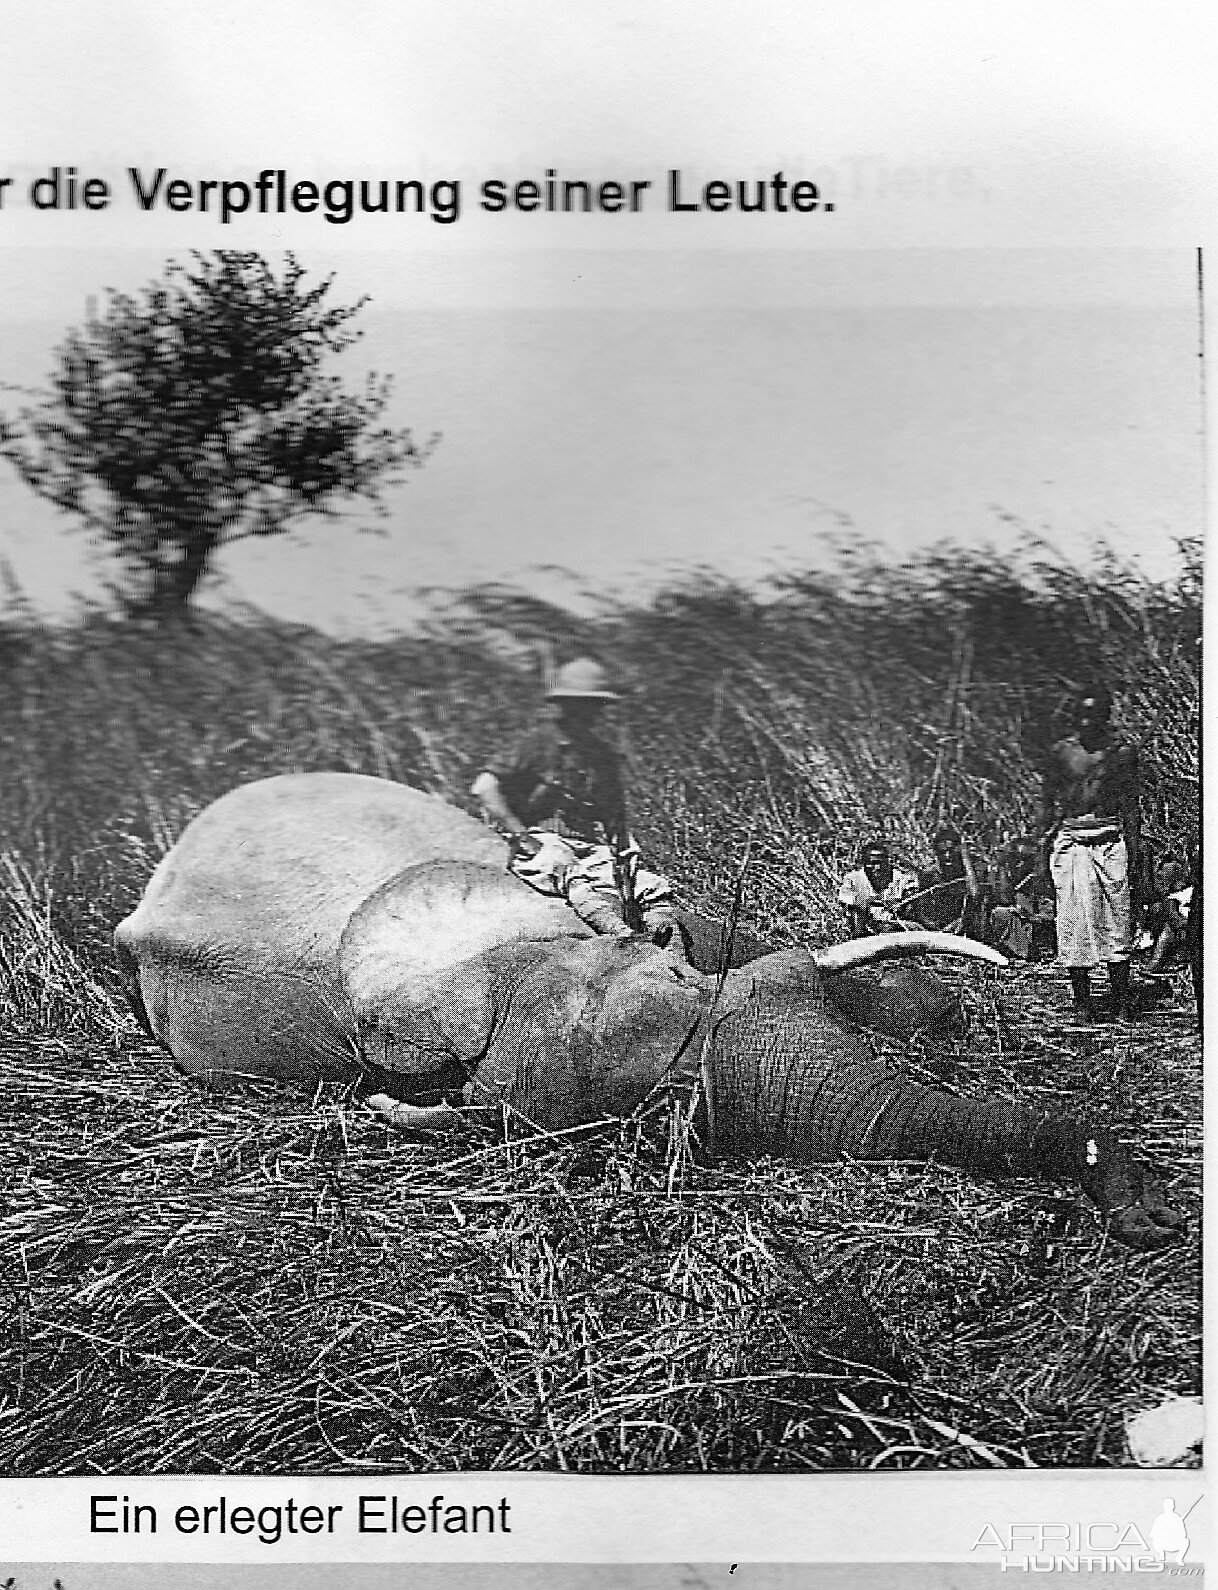 Kuhnert with one elephant, shot in Tanzania, long before WWI